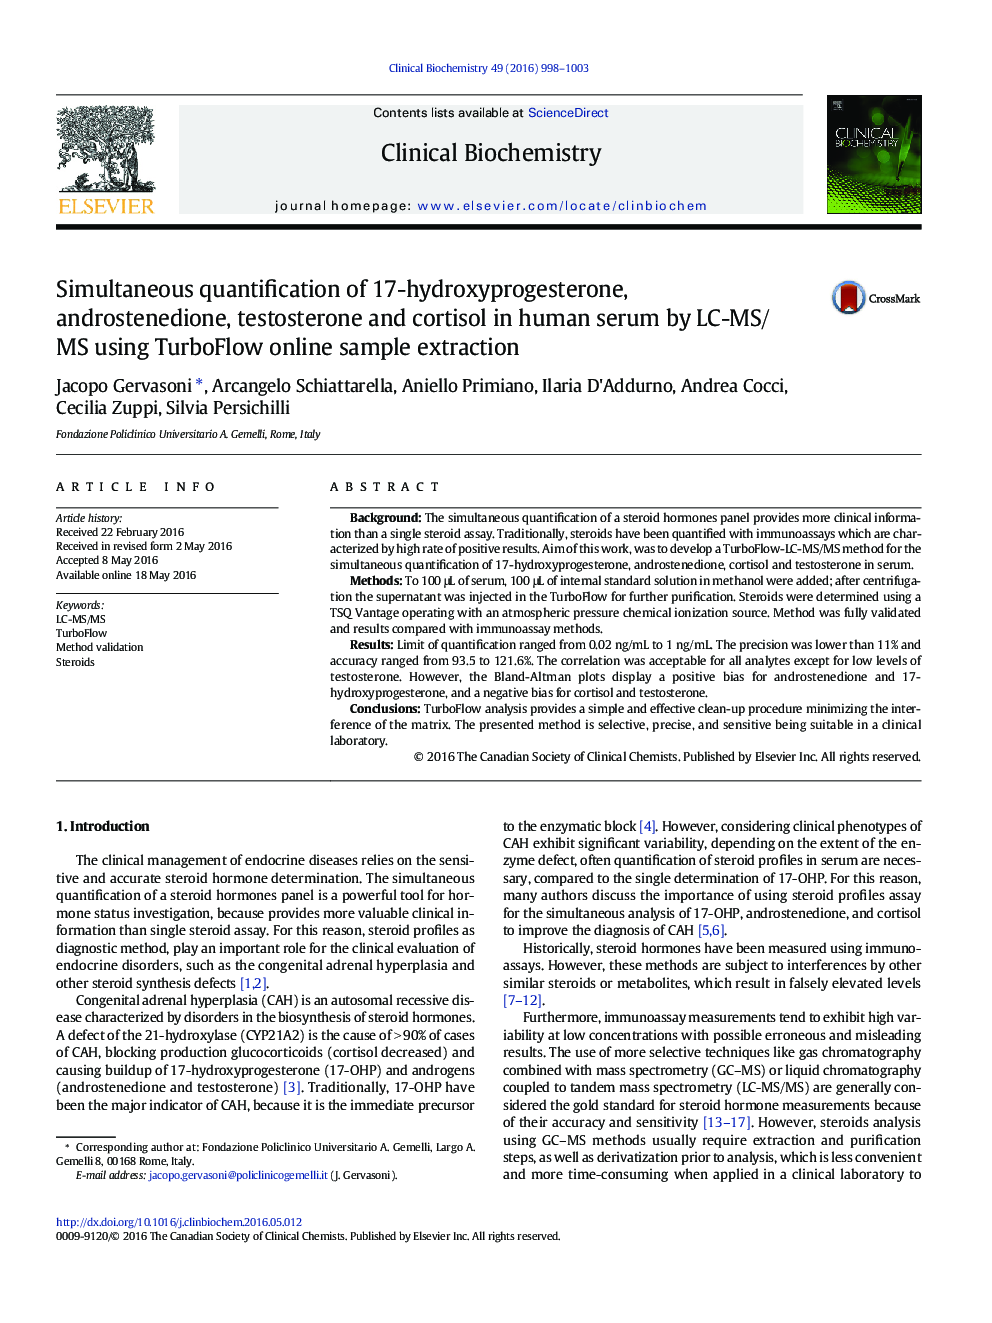 Simultaneous quantification of 17-hydroxyprogesterone, androstenedione, testosterone and cortisol in human serum by LC-MS/MS using TurboFlow online sample extraction